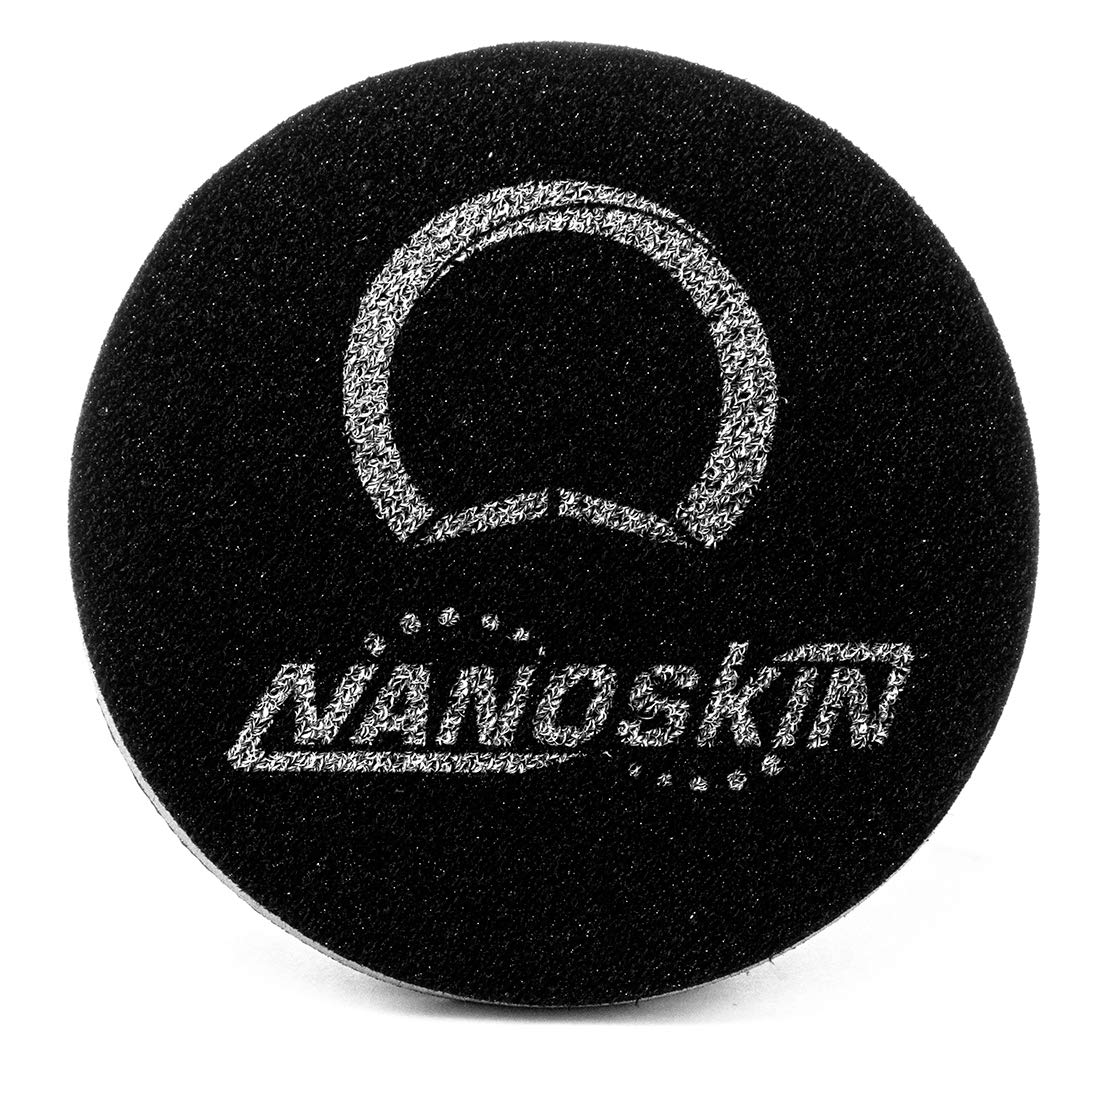 Nanoskin AUTOSCRUB 6" Surface Prep Pad Fine Grade- Patented Clay Bar Replacement Tool to Remove Embedded Contaminants Before Wax & Coating | Safe for Painted Surface, Glass, Plastic, Metal & More